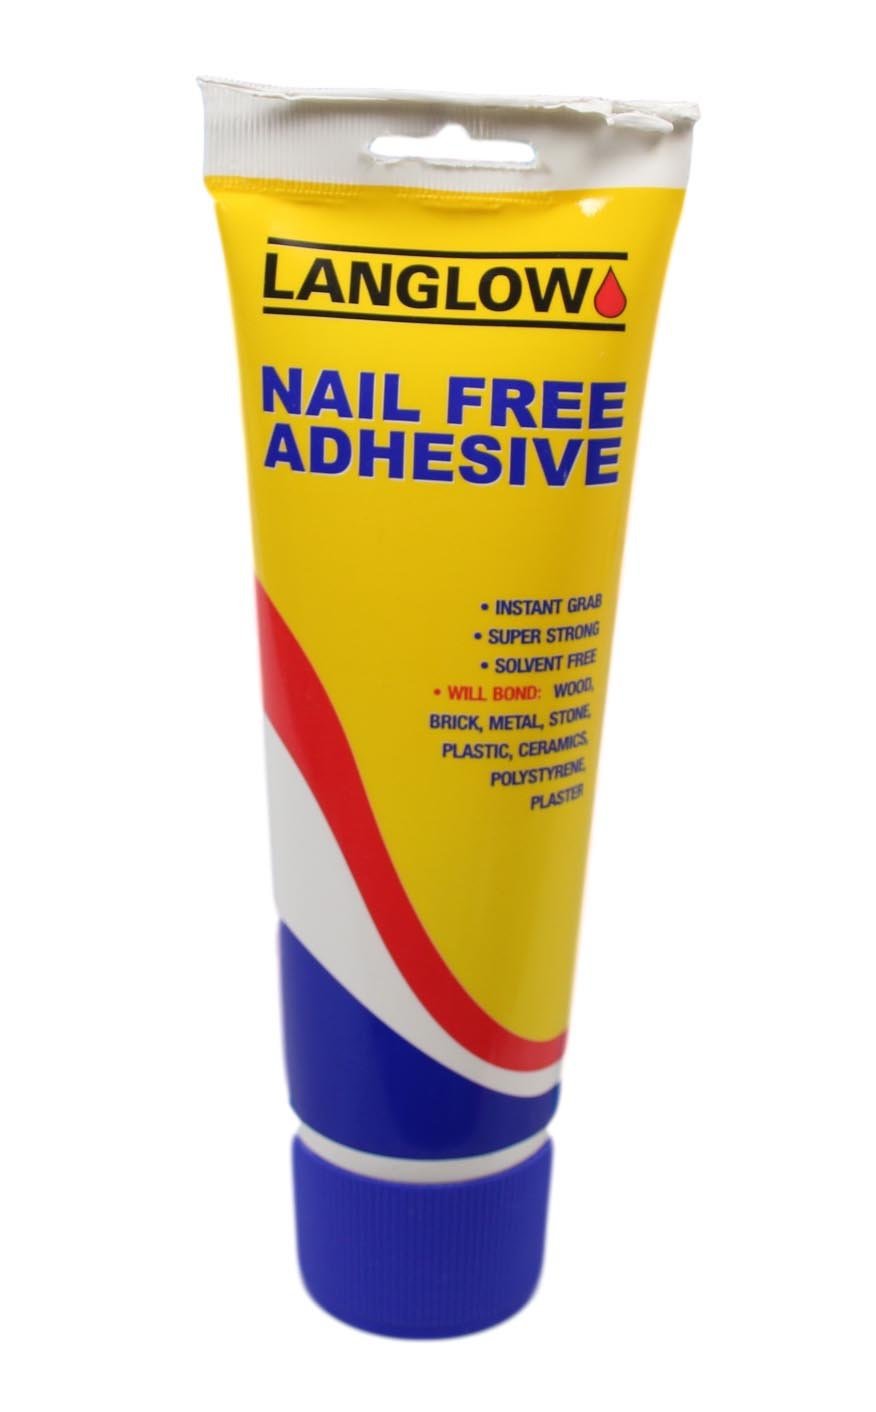 Langlow Nail Free Adhesive Instant Grab Super Strong Adhesive 30-8 (Parcel Rate)